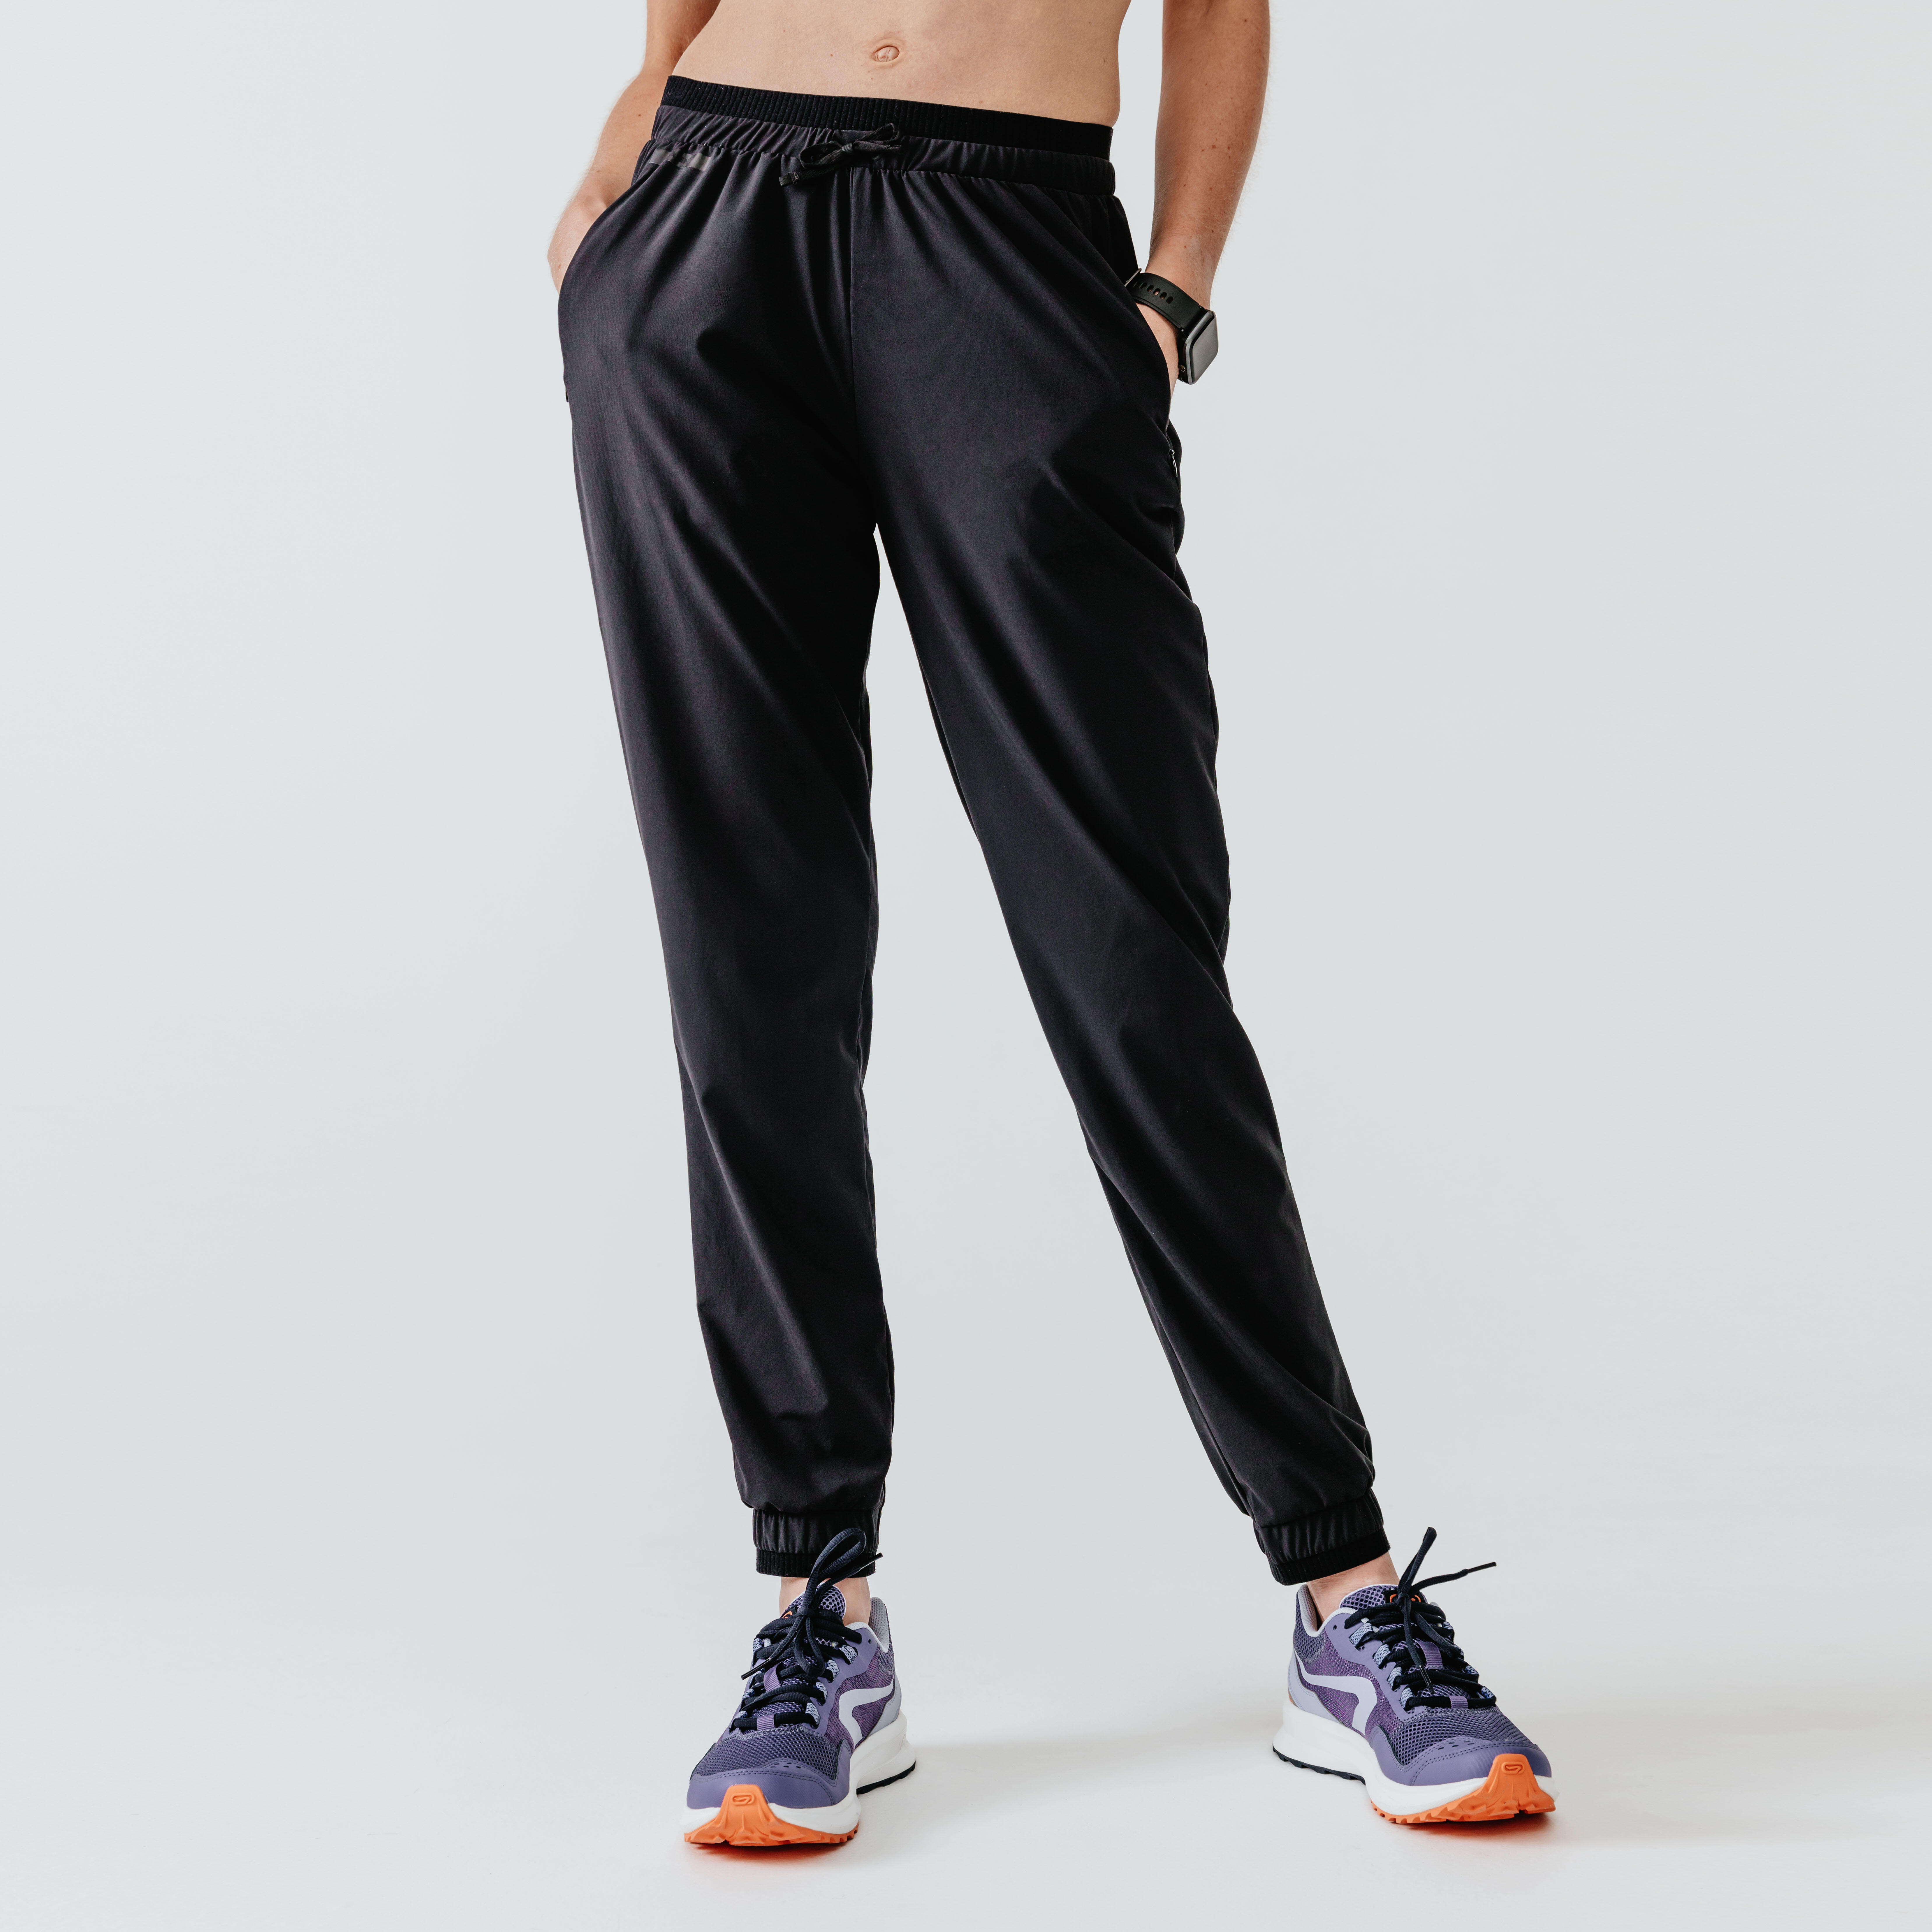 Experience more than 146 running track pants best